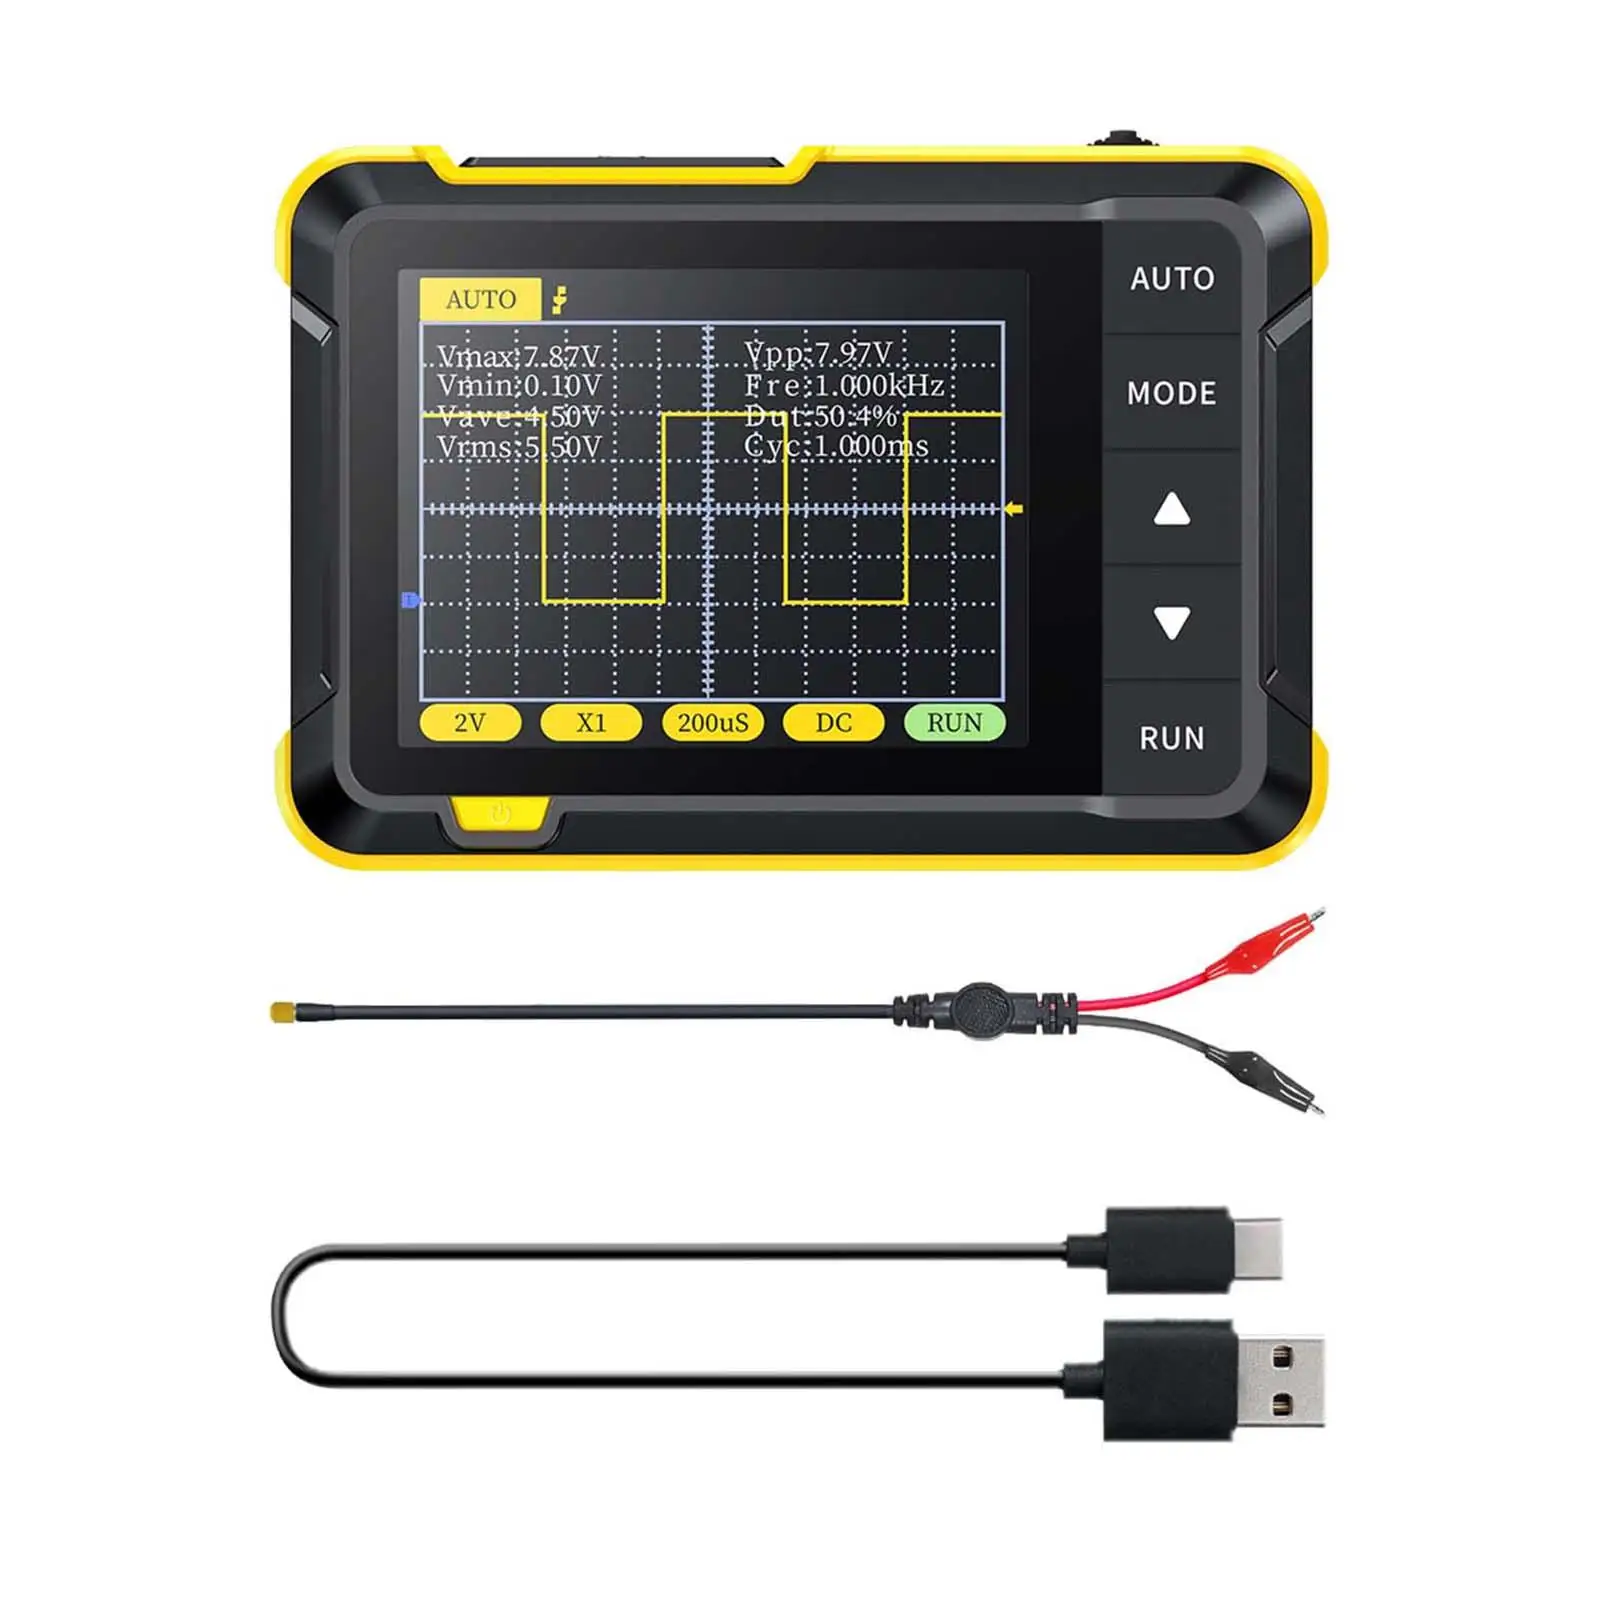 Handheld Digital Oscilloscope for Power Tester Meter Electronic DIY Detection Teaching Home Appliance Repair Scientific Research